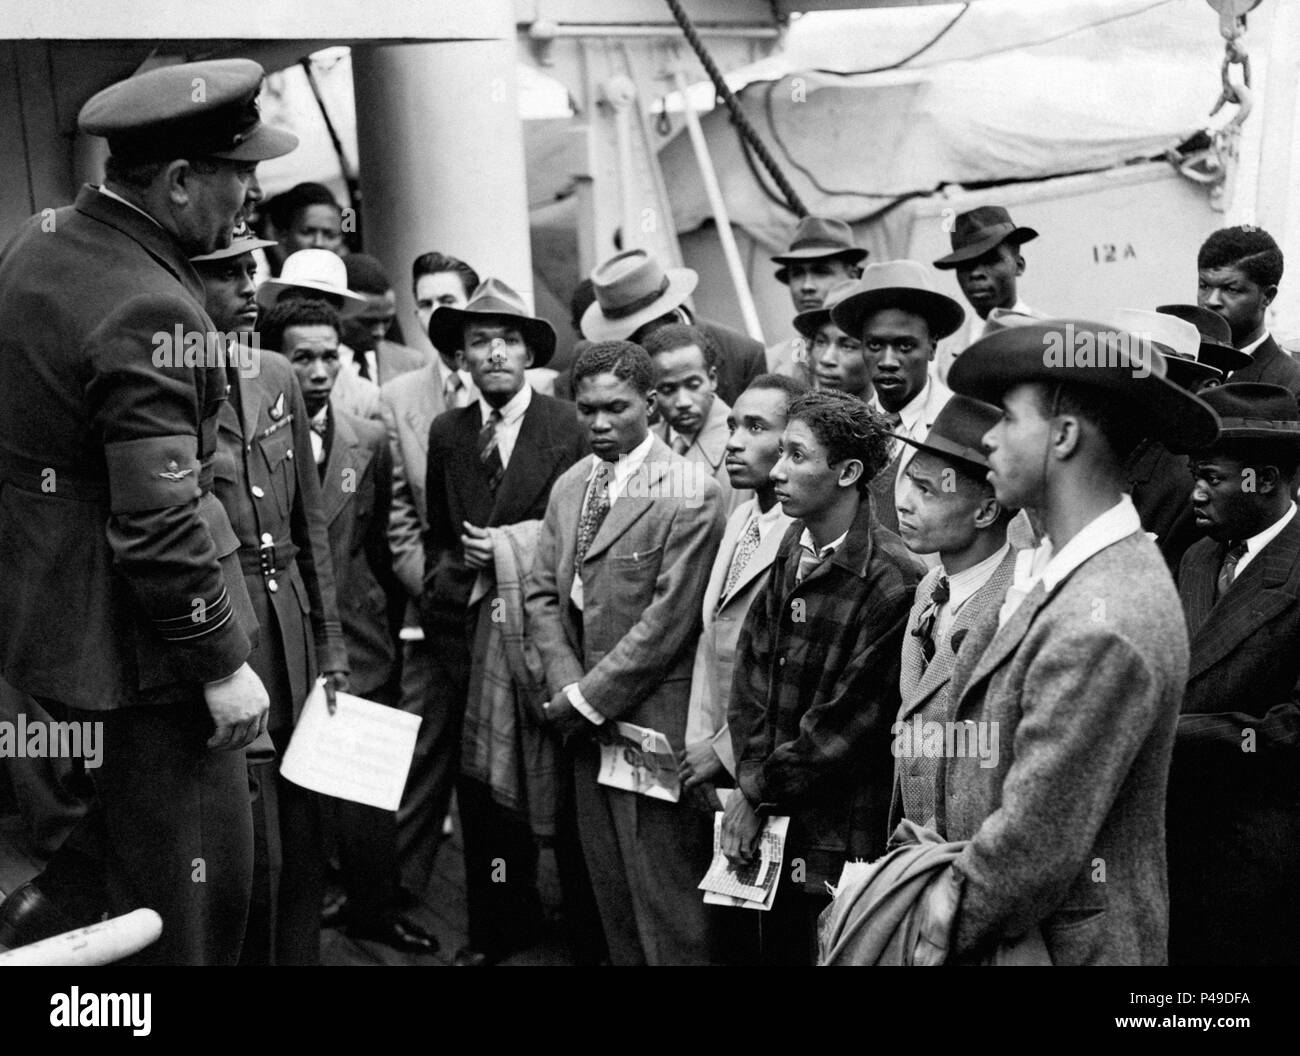 EMBARGOED TO 0001 FRIDAY JUNE 22 File photo 22/06/48 of Jamaican immigrants welcomed by RAF officials from the Colonial Office after the ex-troopship HMT 'Empire Windrush' landed them at Tilbury. Friday marks the 70th anniversary of the generation's beginning when about 500 Caribbeans stepped off the Empire Windrush in Tilbury Docks, Essex, to join the effort to rebuild post-war Britain. Stock Photo